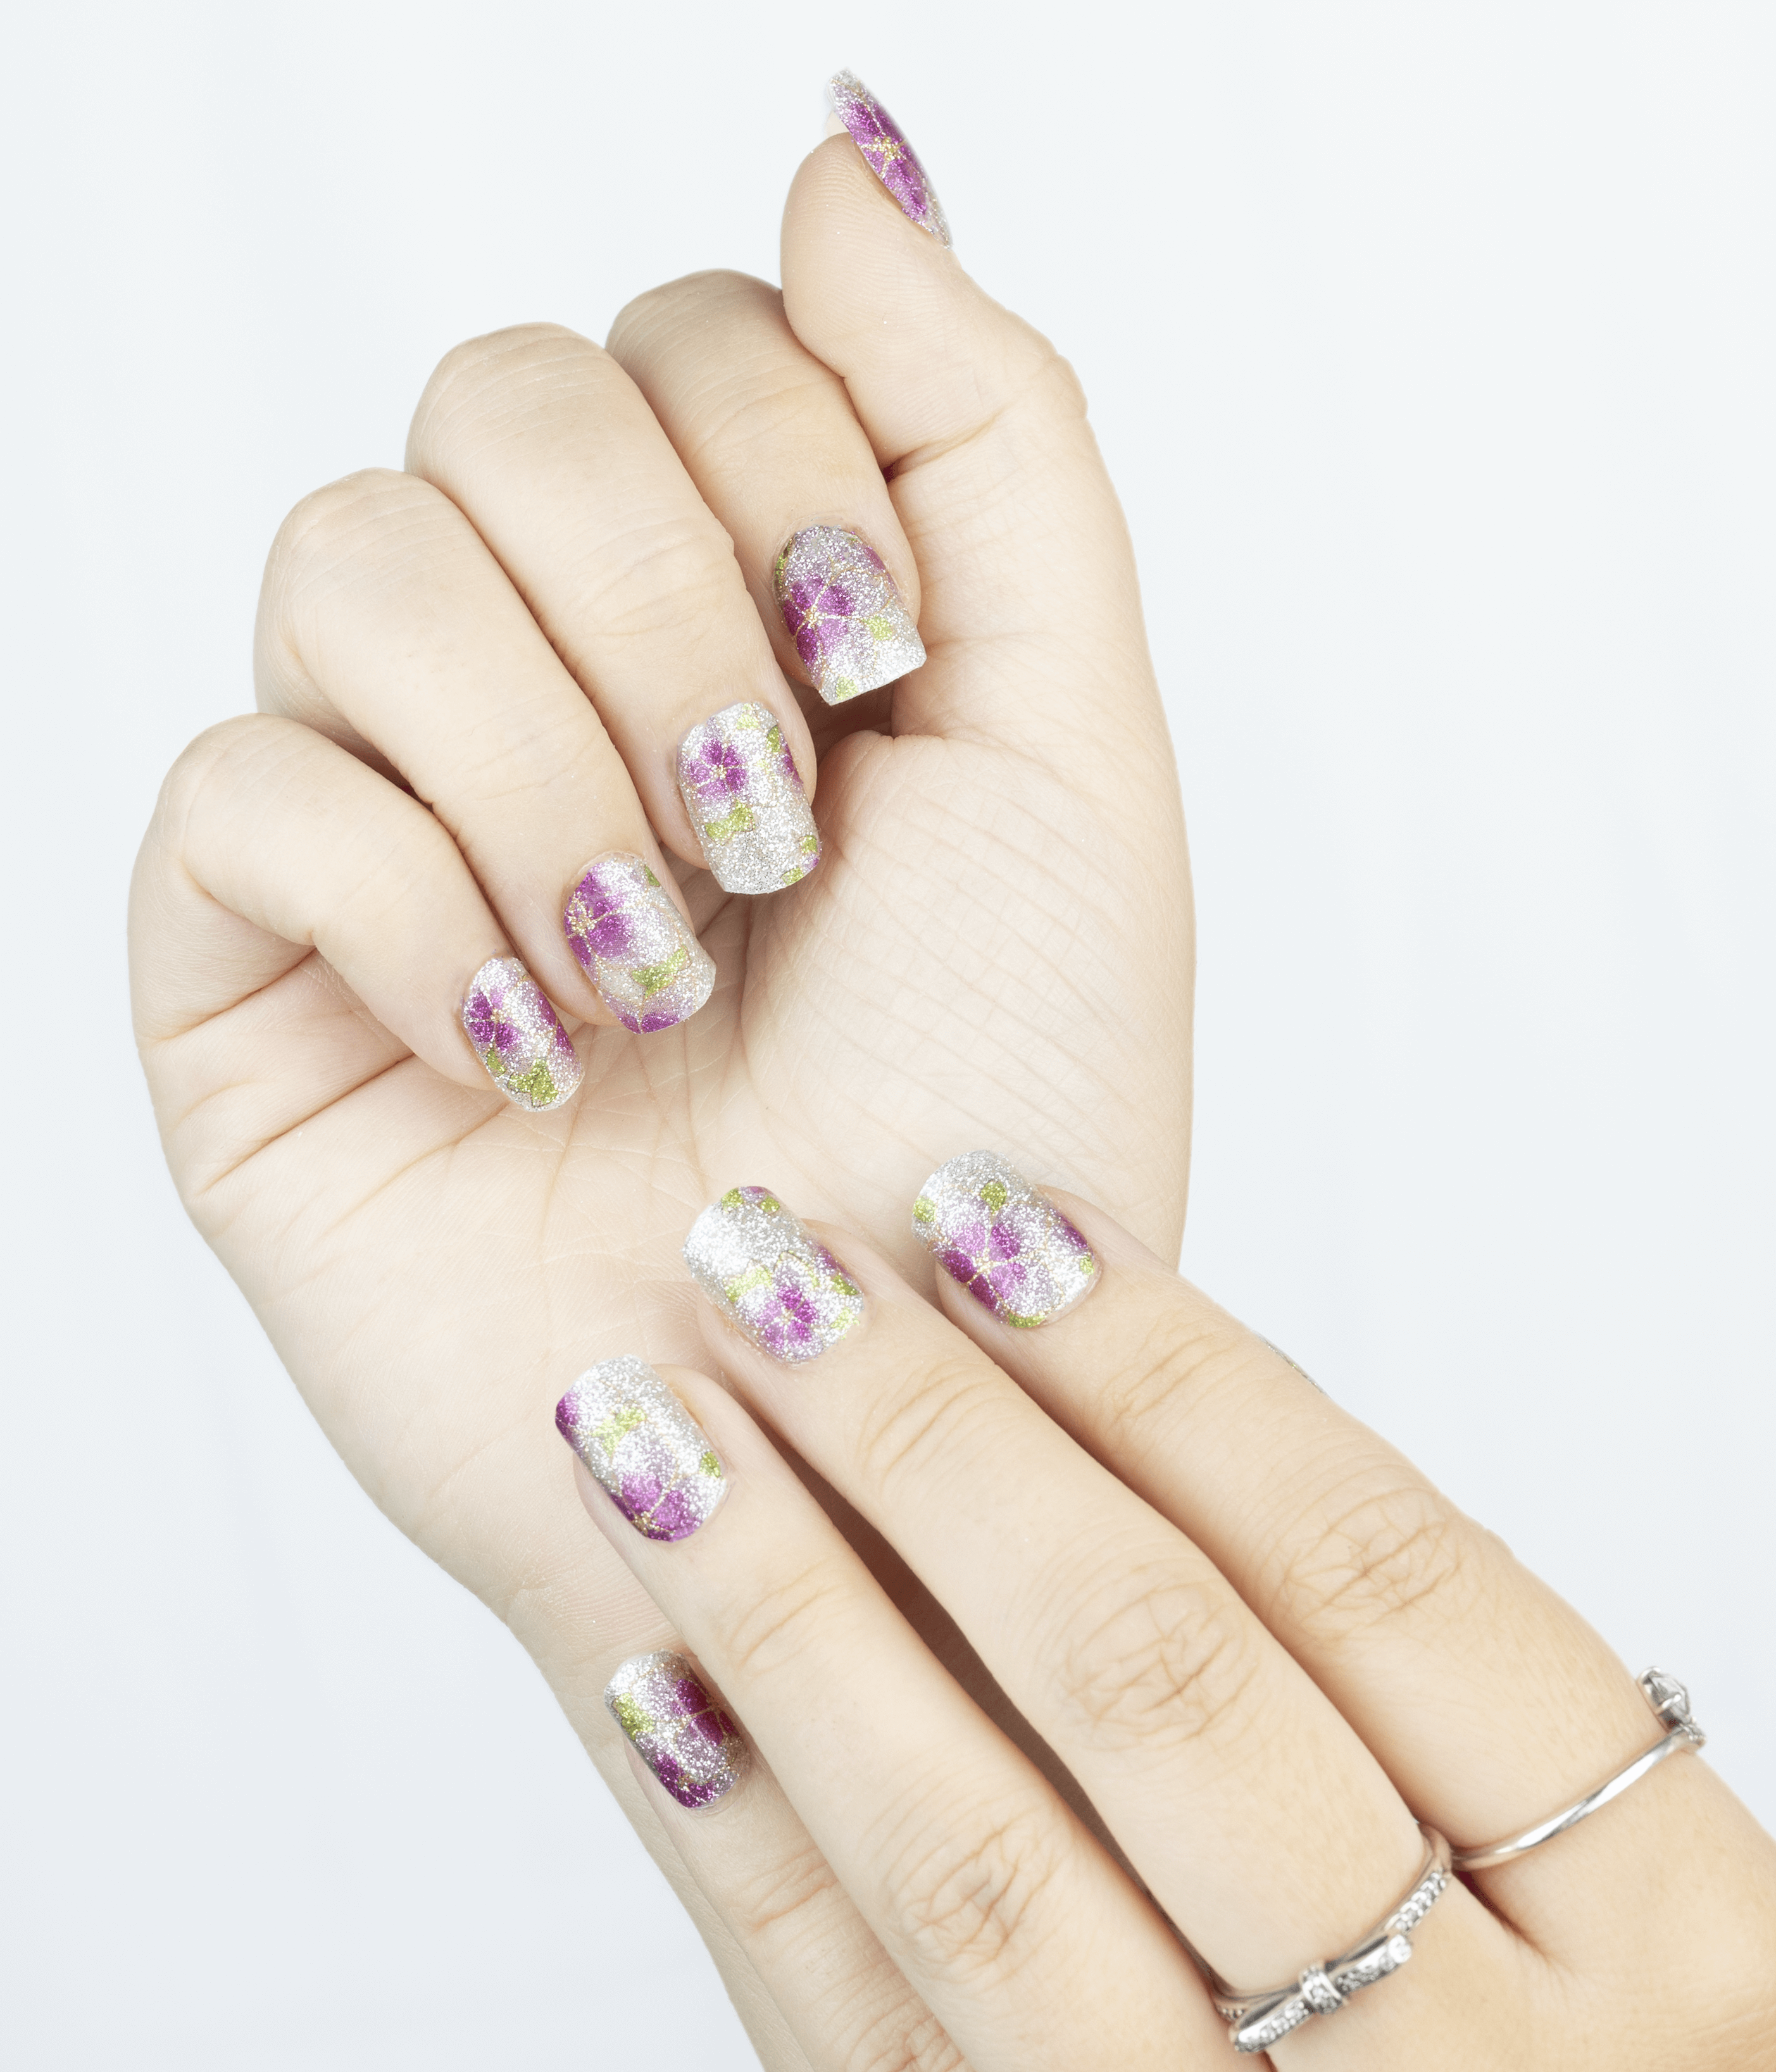 Lily & Fox “Amore” nail wraps with a magnetic gel top coat :  r/NailWrapsGalore